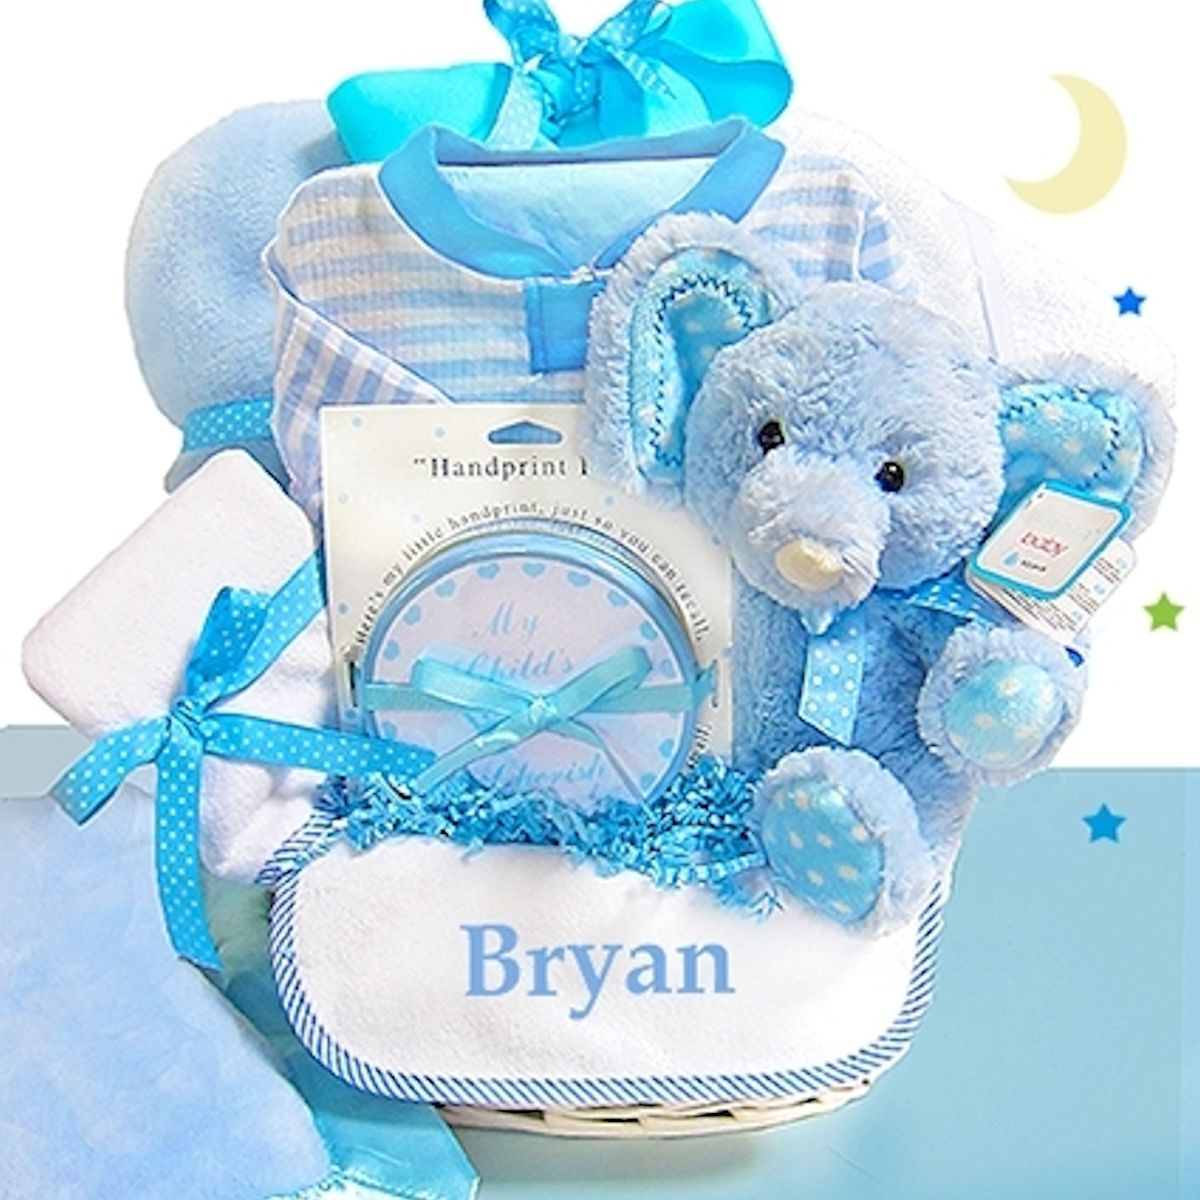 Personalized Gifts For Baby Boy
 Baby Boy Gift Basket Blue Elephant